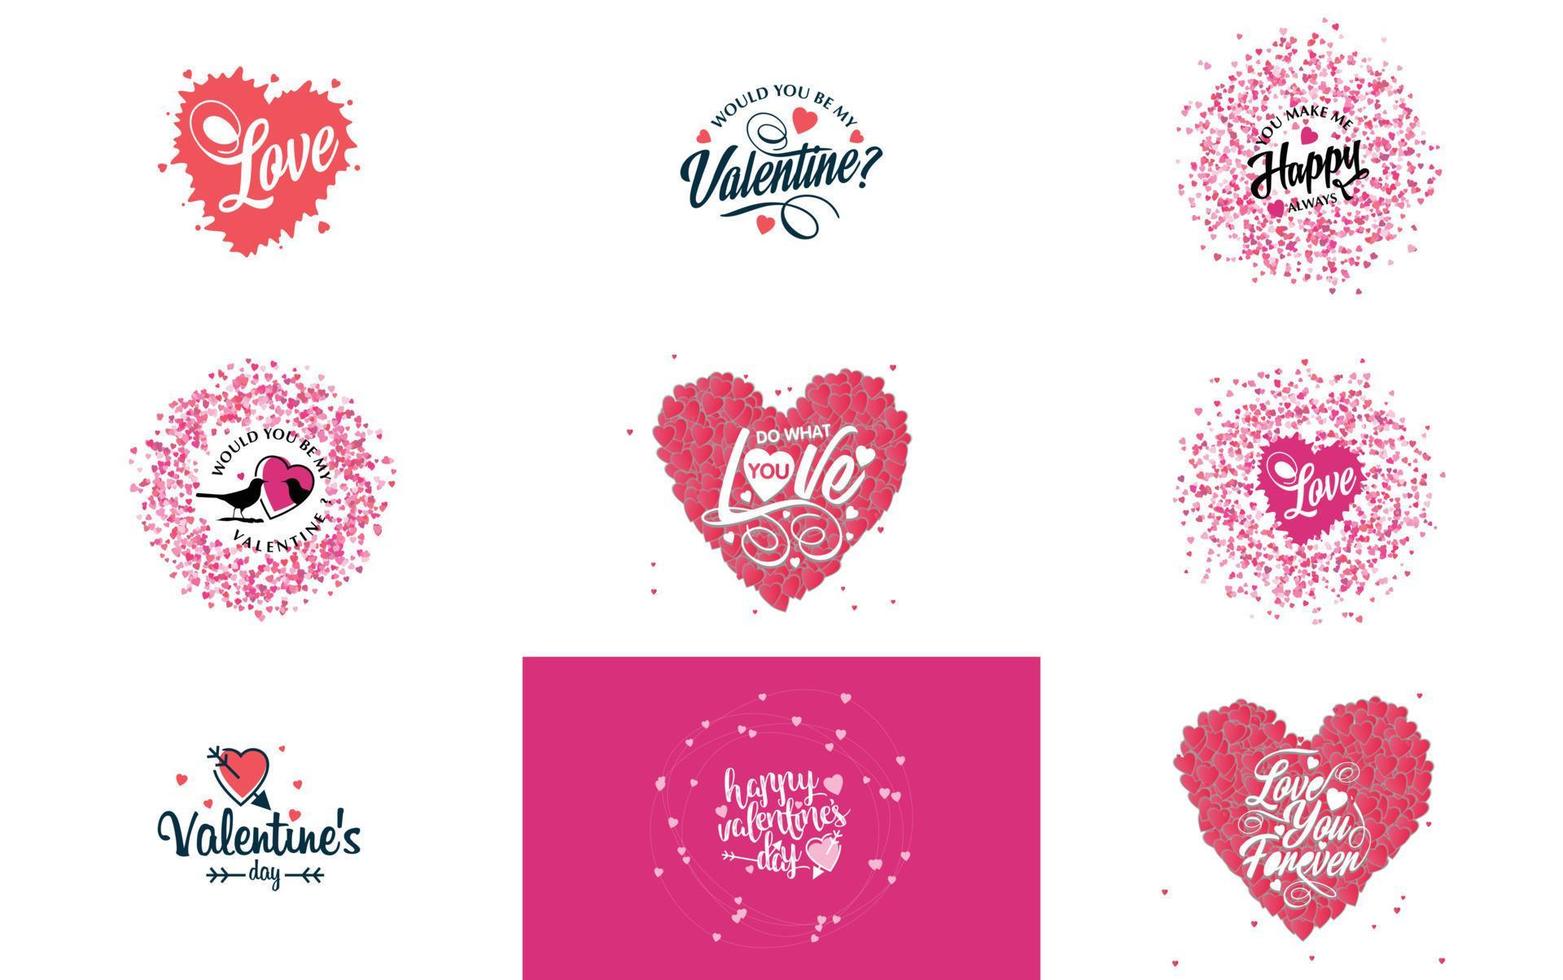 Happy Valentine's Day banner template with a romantic theme and a pink and red color scheme vector